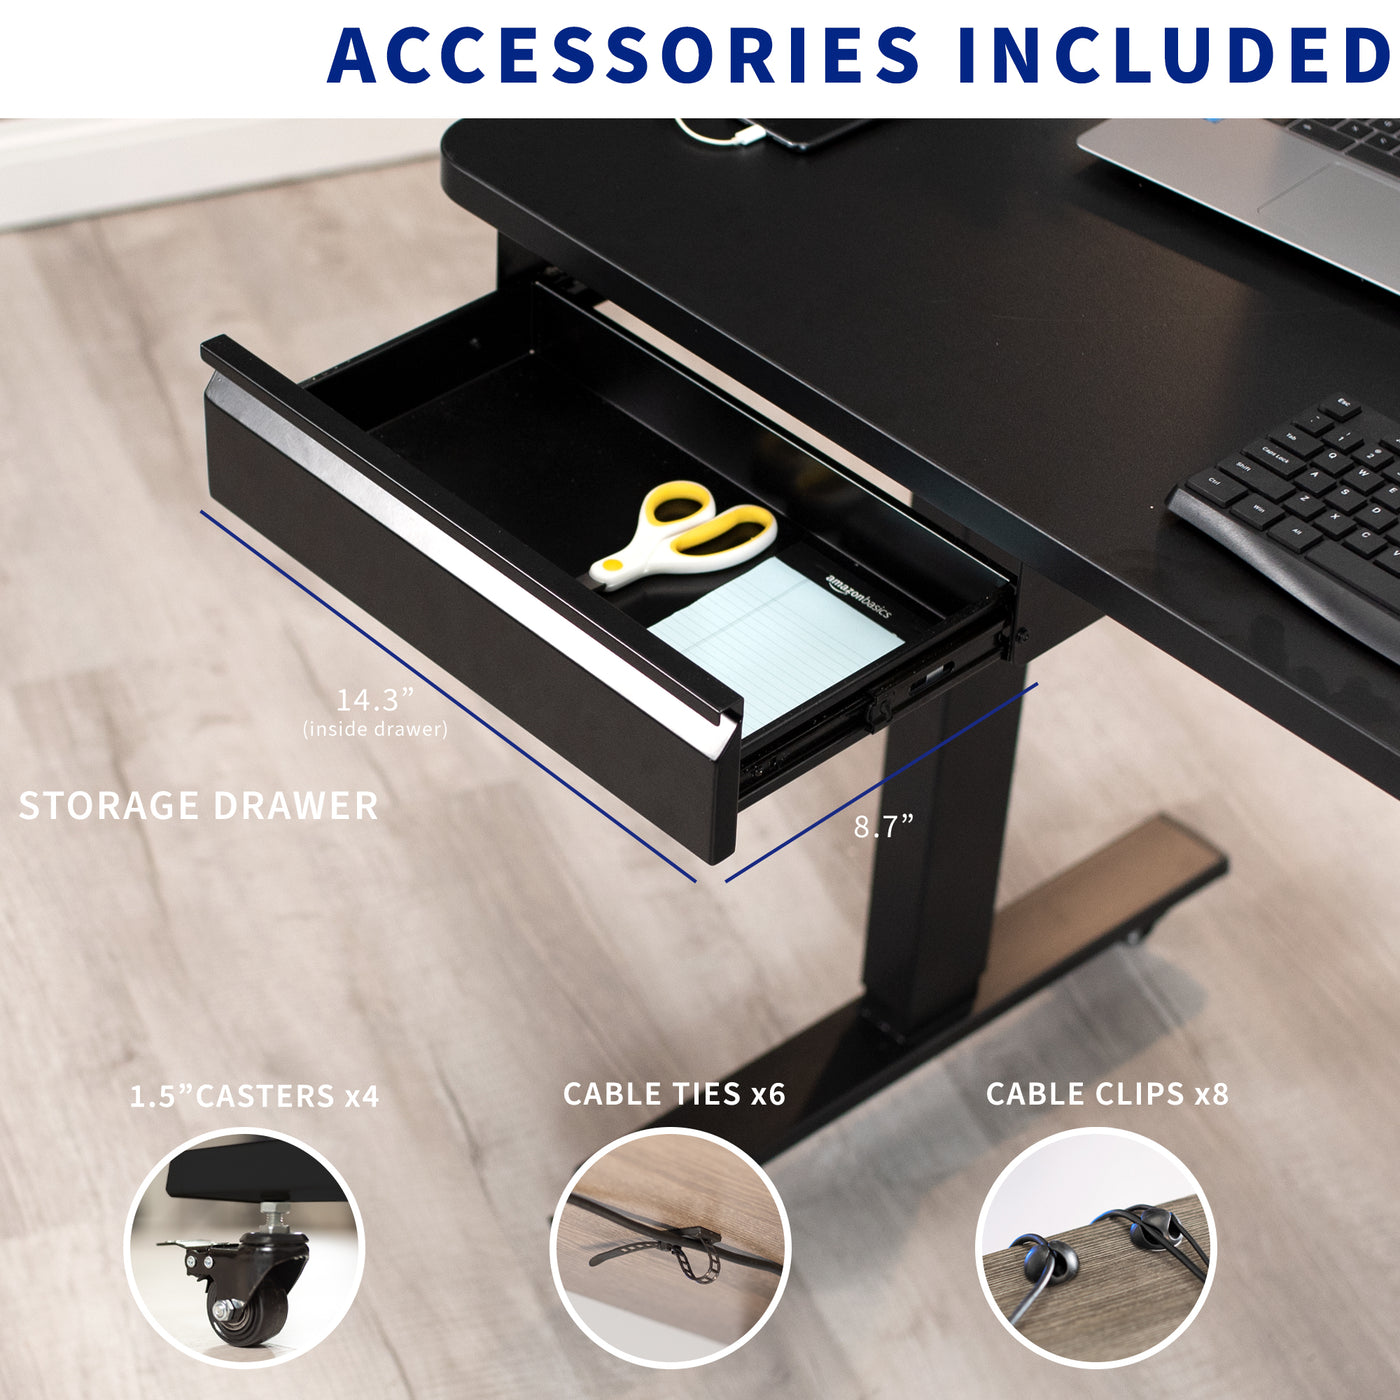 Accessories included with the desk include 4 locking caster wheels, cable ties and clips, and an under desk storage drawer.